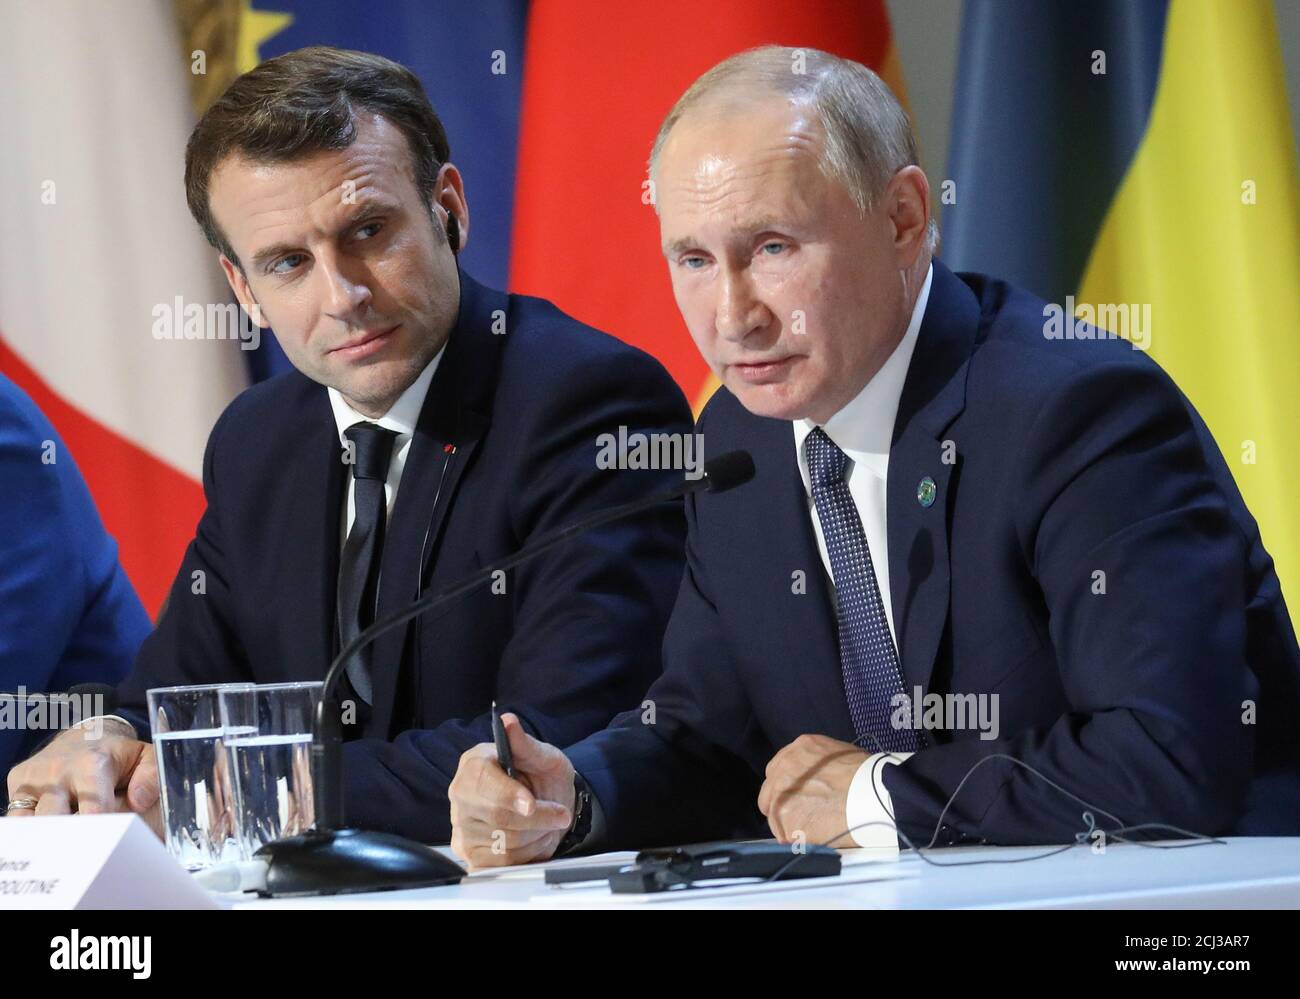 French President Emmanuel Macron and Russian President Vladimir Putin give a press conference after a summit on Ukraine at the Elysee Palace in Paris, December 9, 2019.  Ludovic Marin/Pool via REUTERS Stock Photo